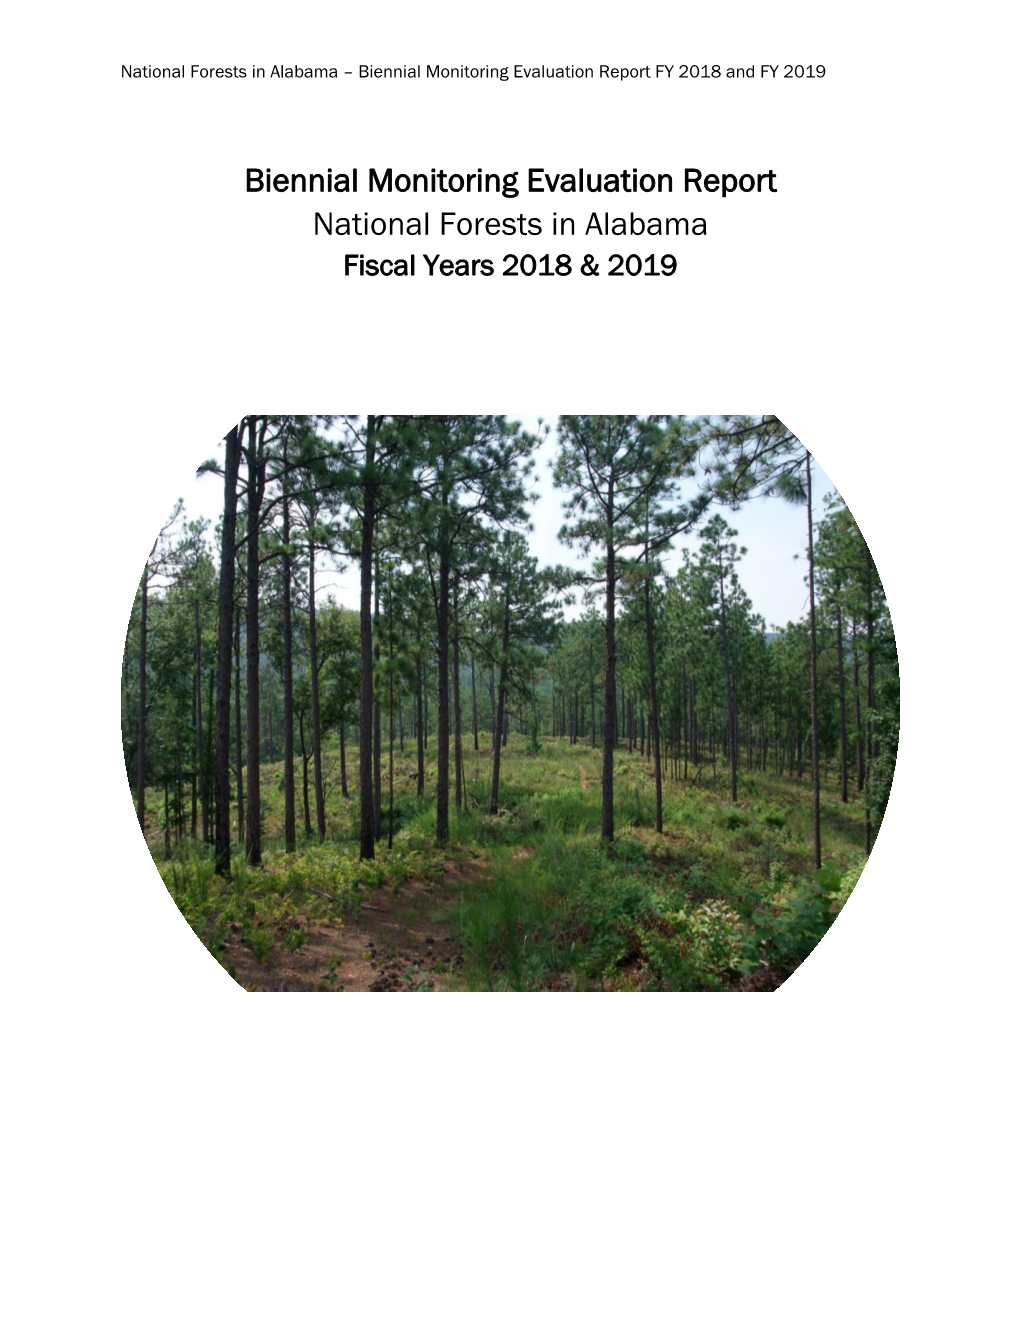 Biennial Monitoring Evaluation Report National Forests in Alabama Fiscal Years 2018 & 2019